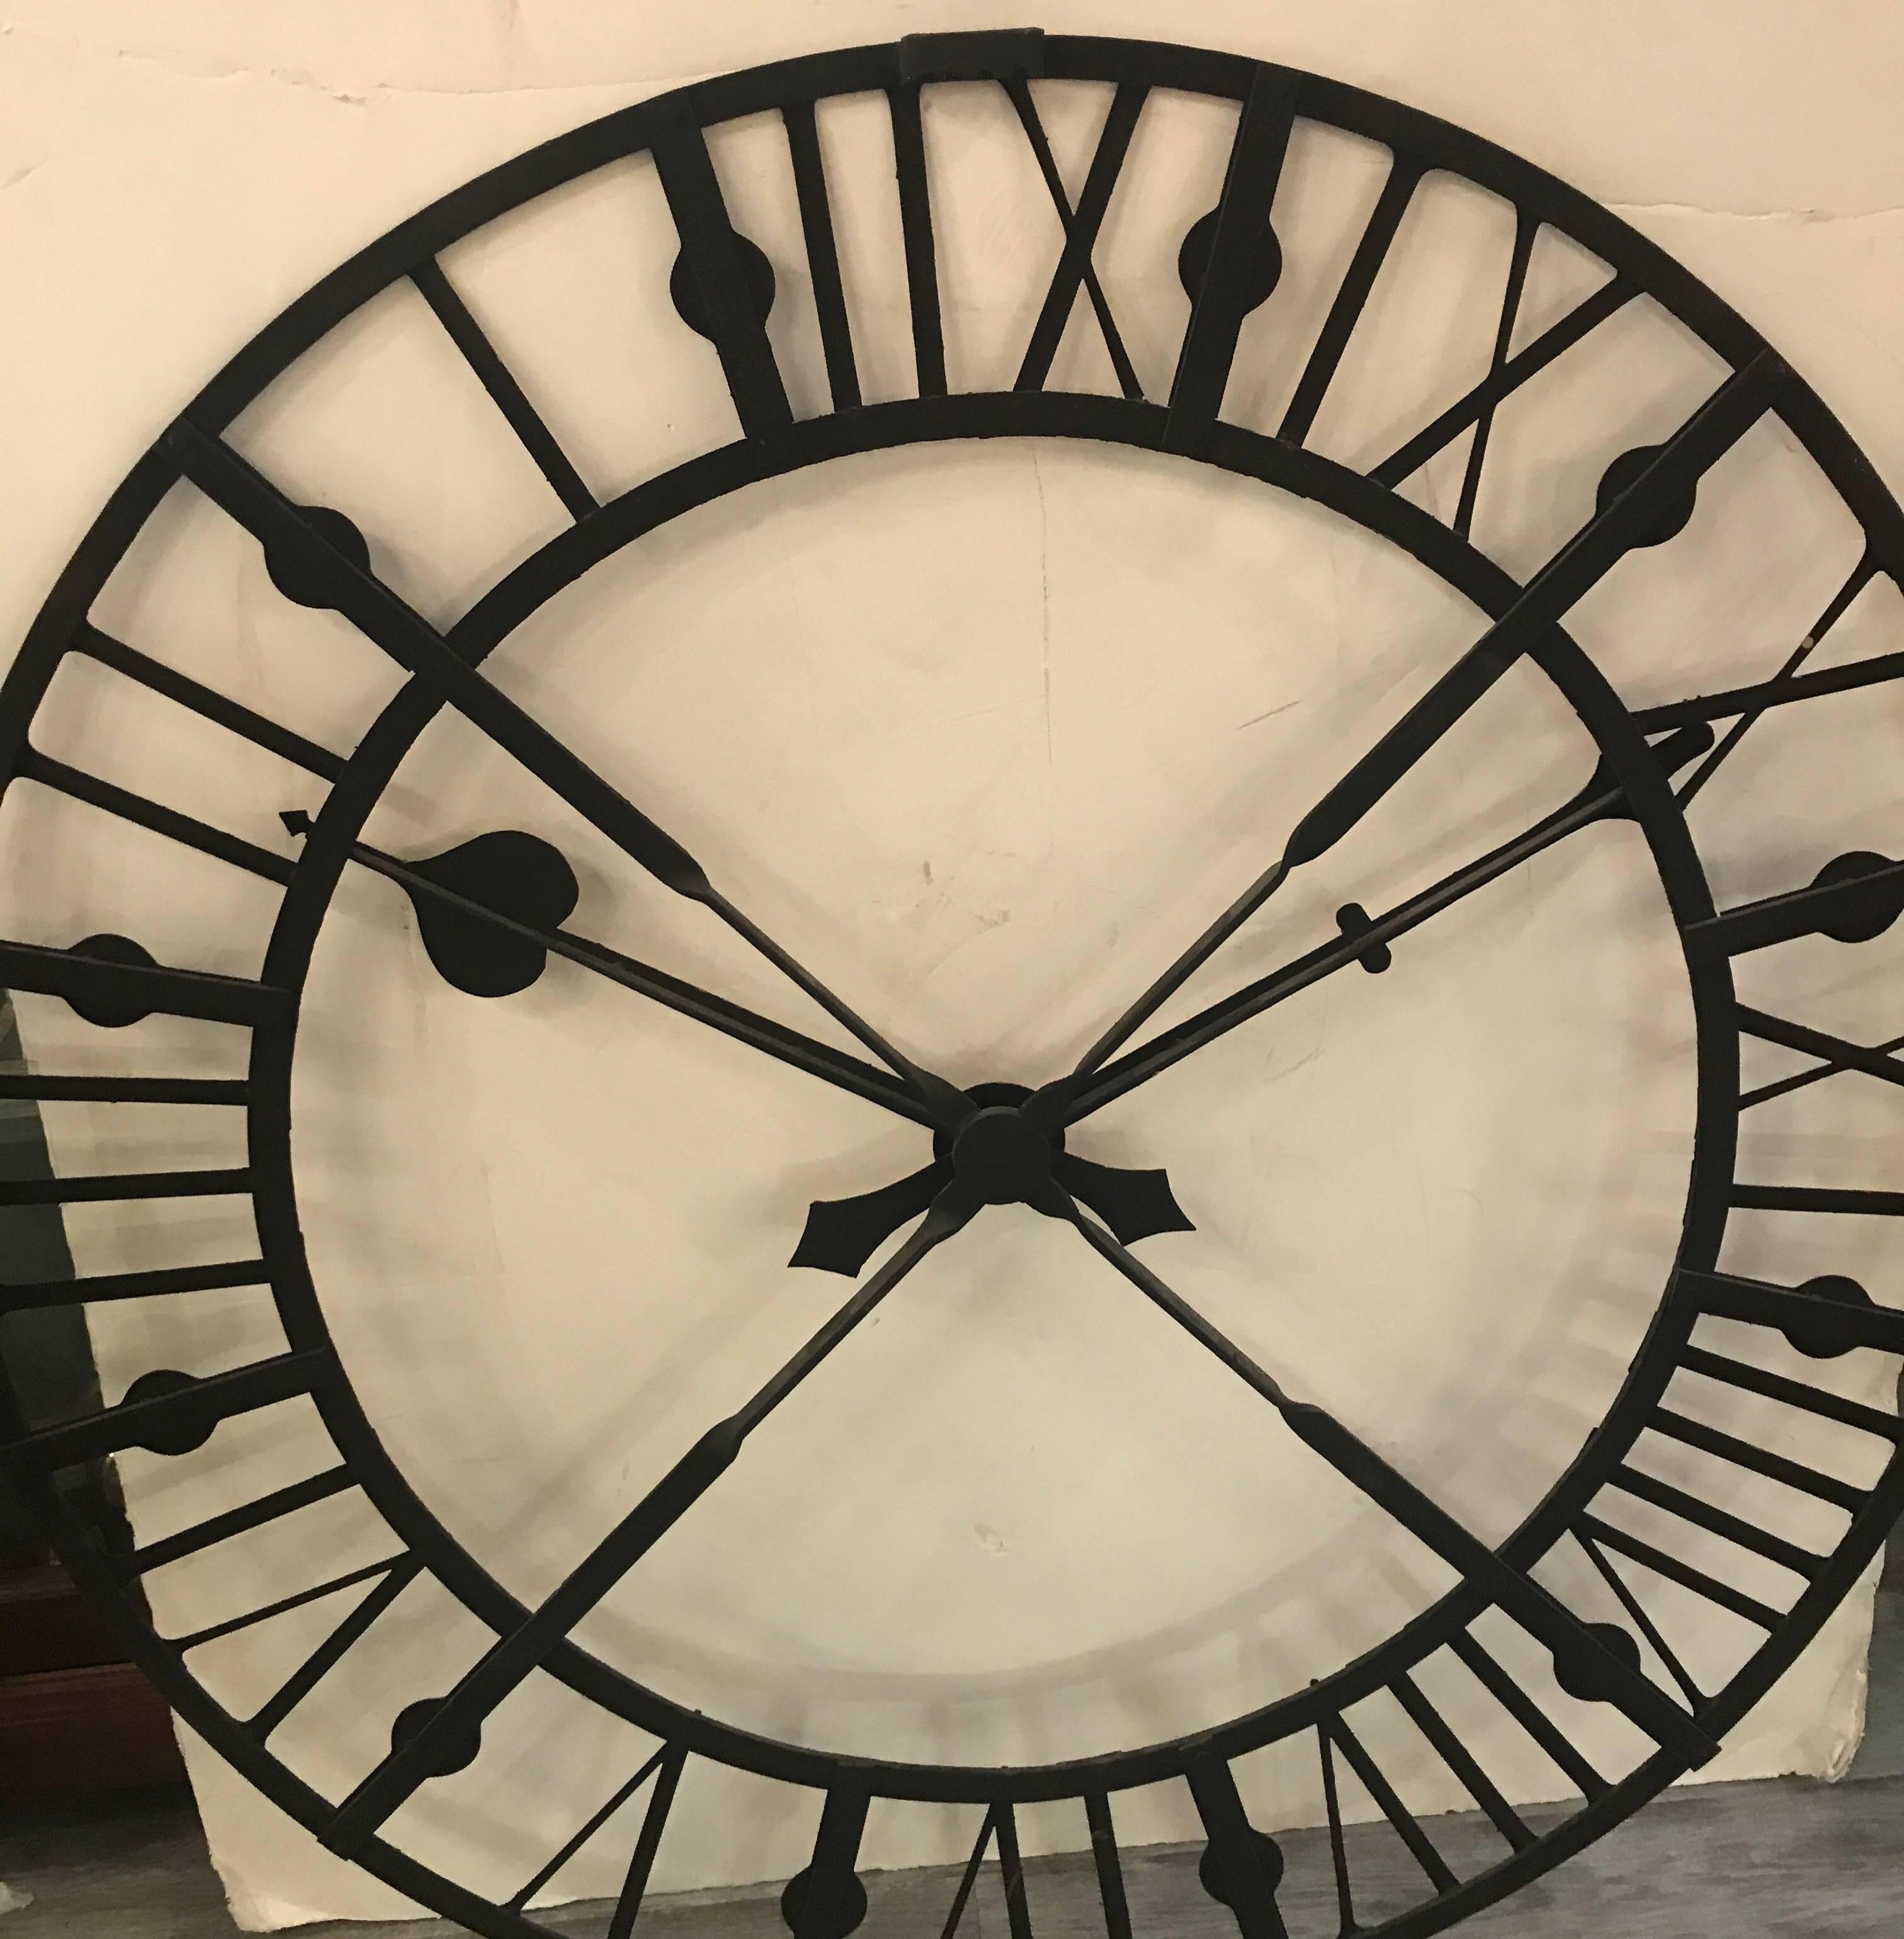 20th Century Large Wrought Iron Clock Face